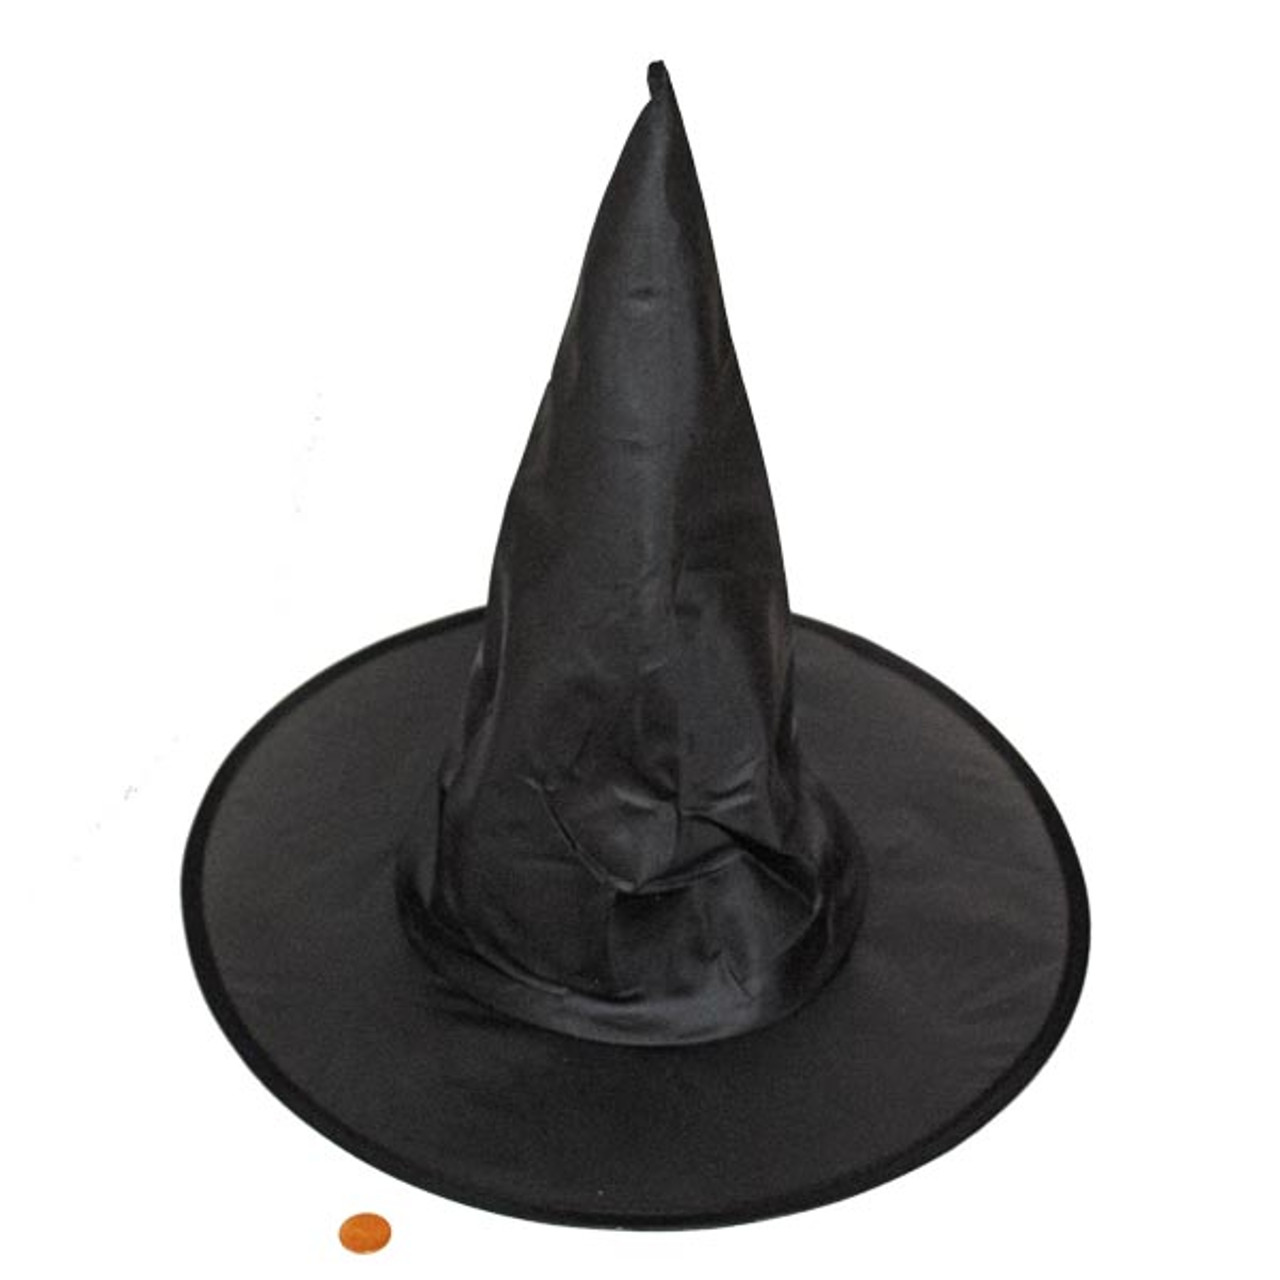 Black Witches Hats - Perfect Halloween Accessory!